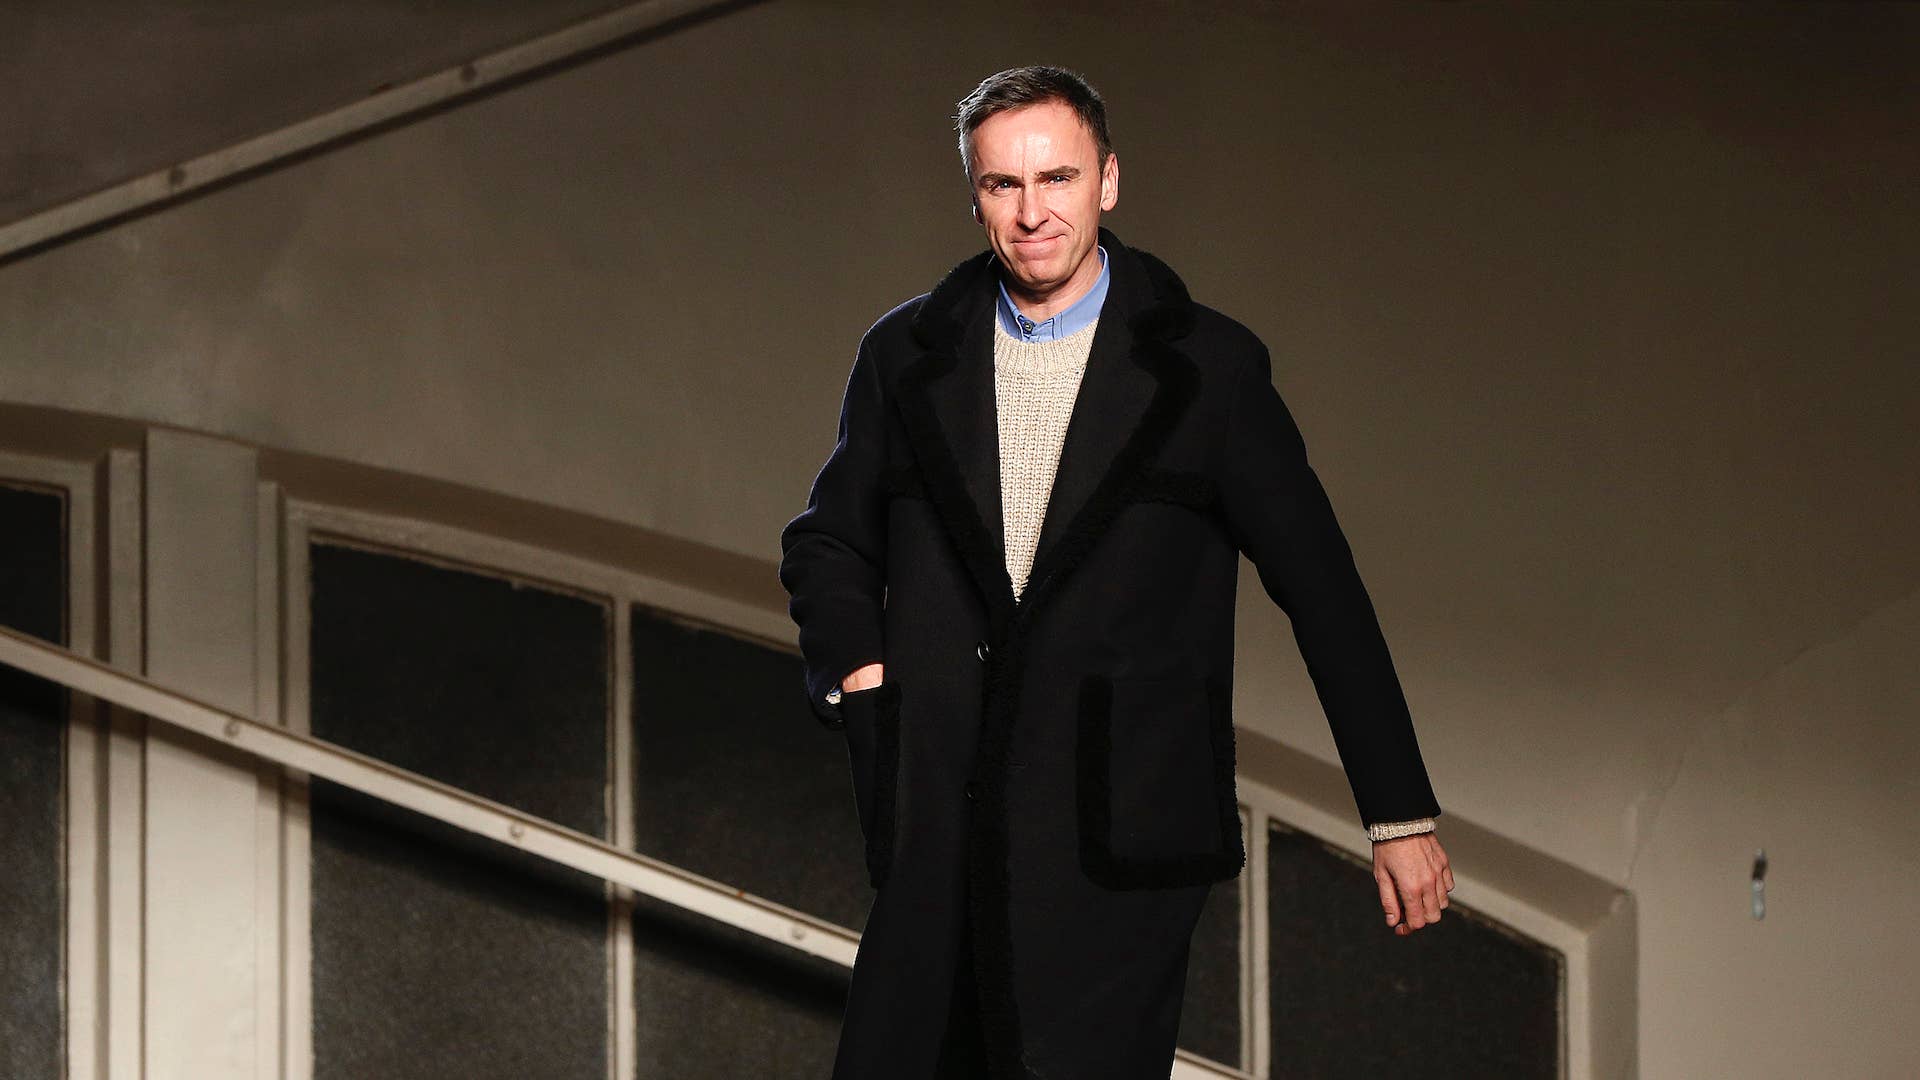 Raf Simons will move his menswear show from Paris to Pitti Uomo for  Spring/Summer 2017, British GQ